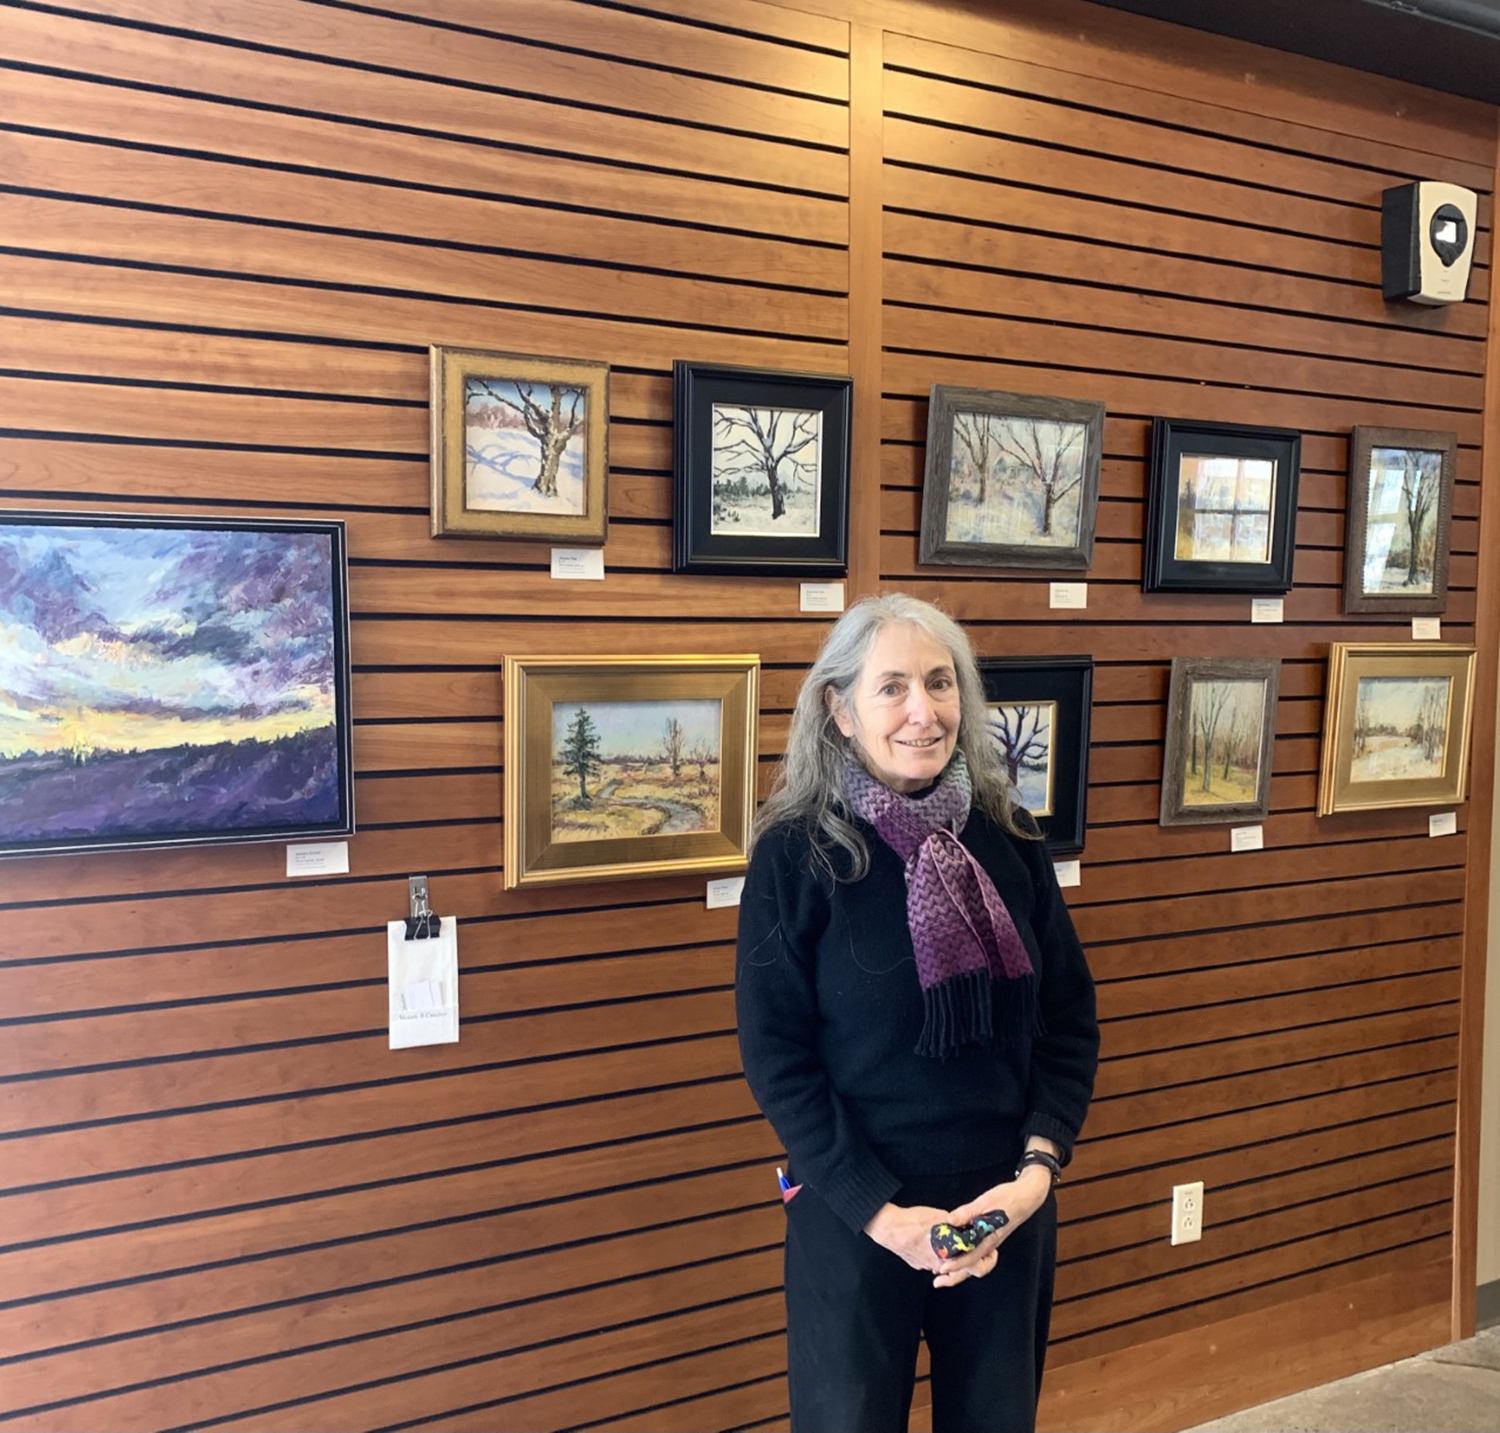 Victoria Brzustowicz Shares “The Colors of Winter” at Mendon Public Library